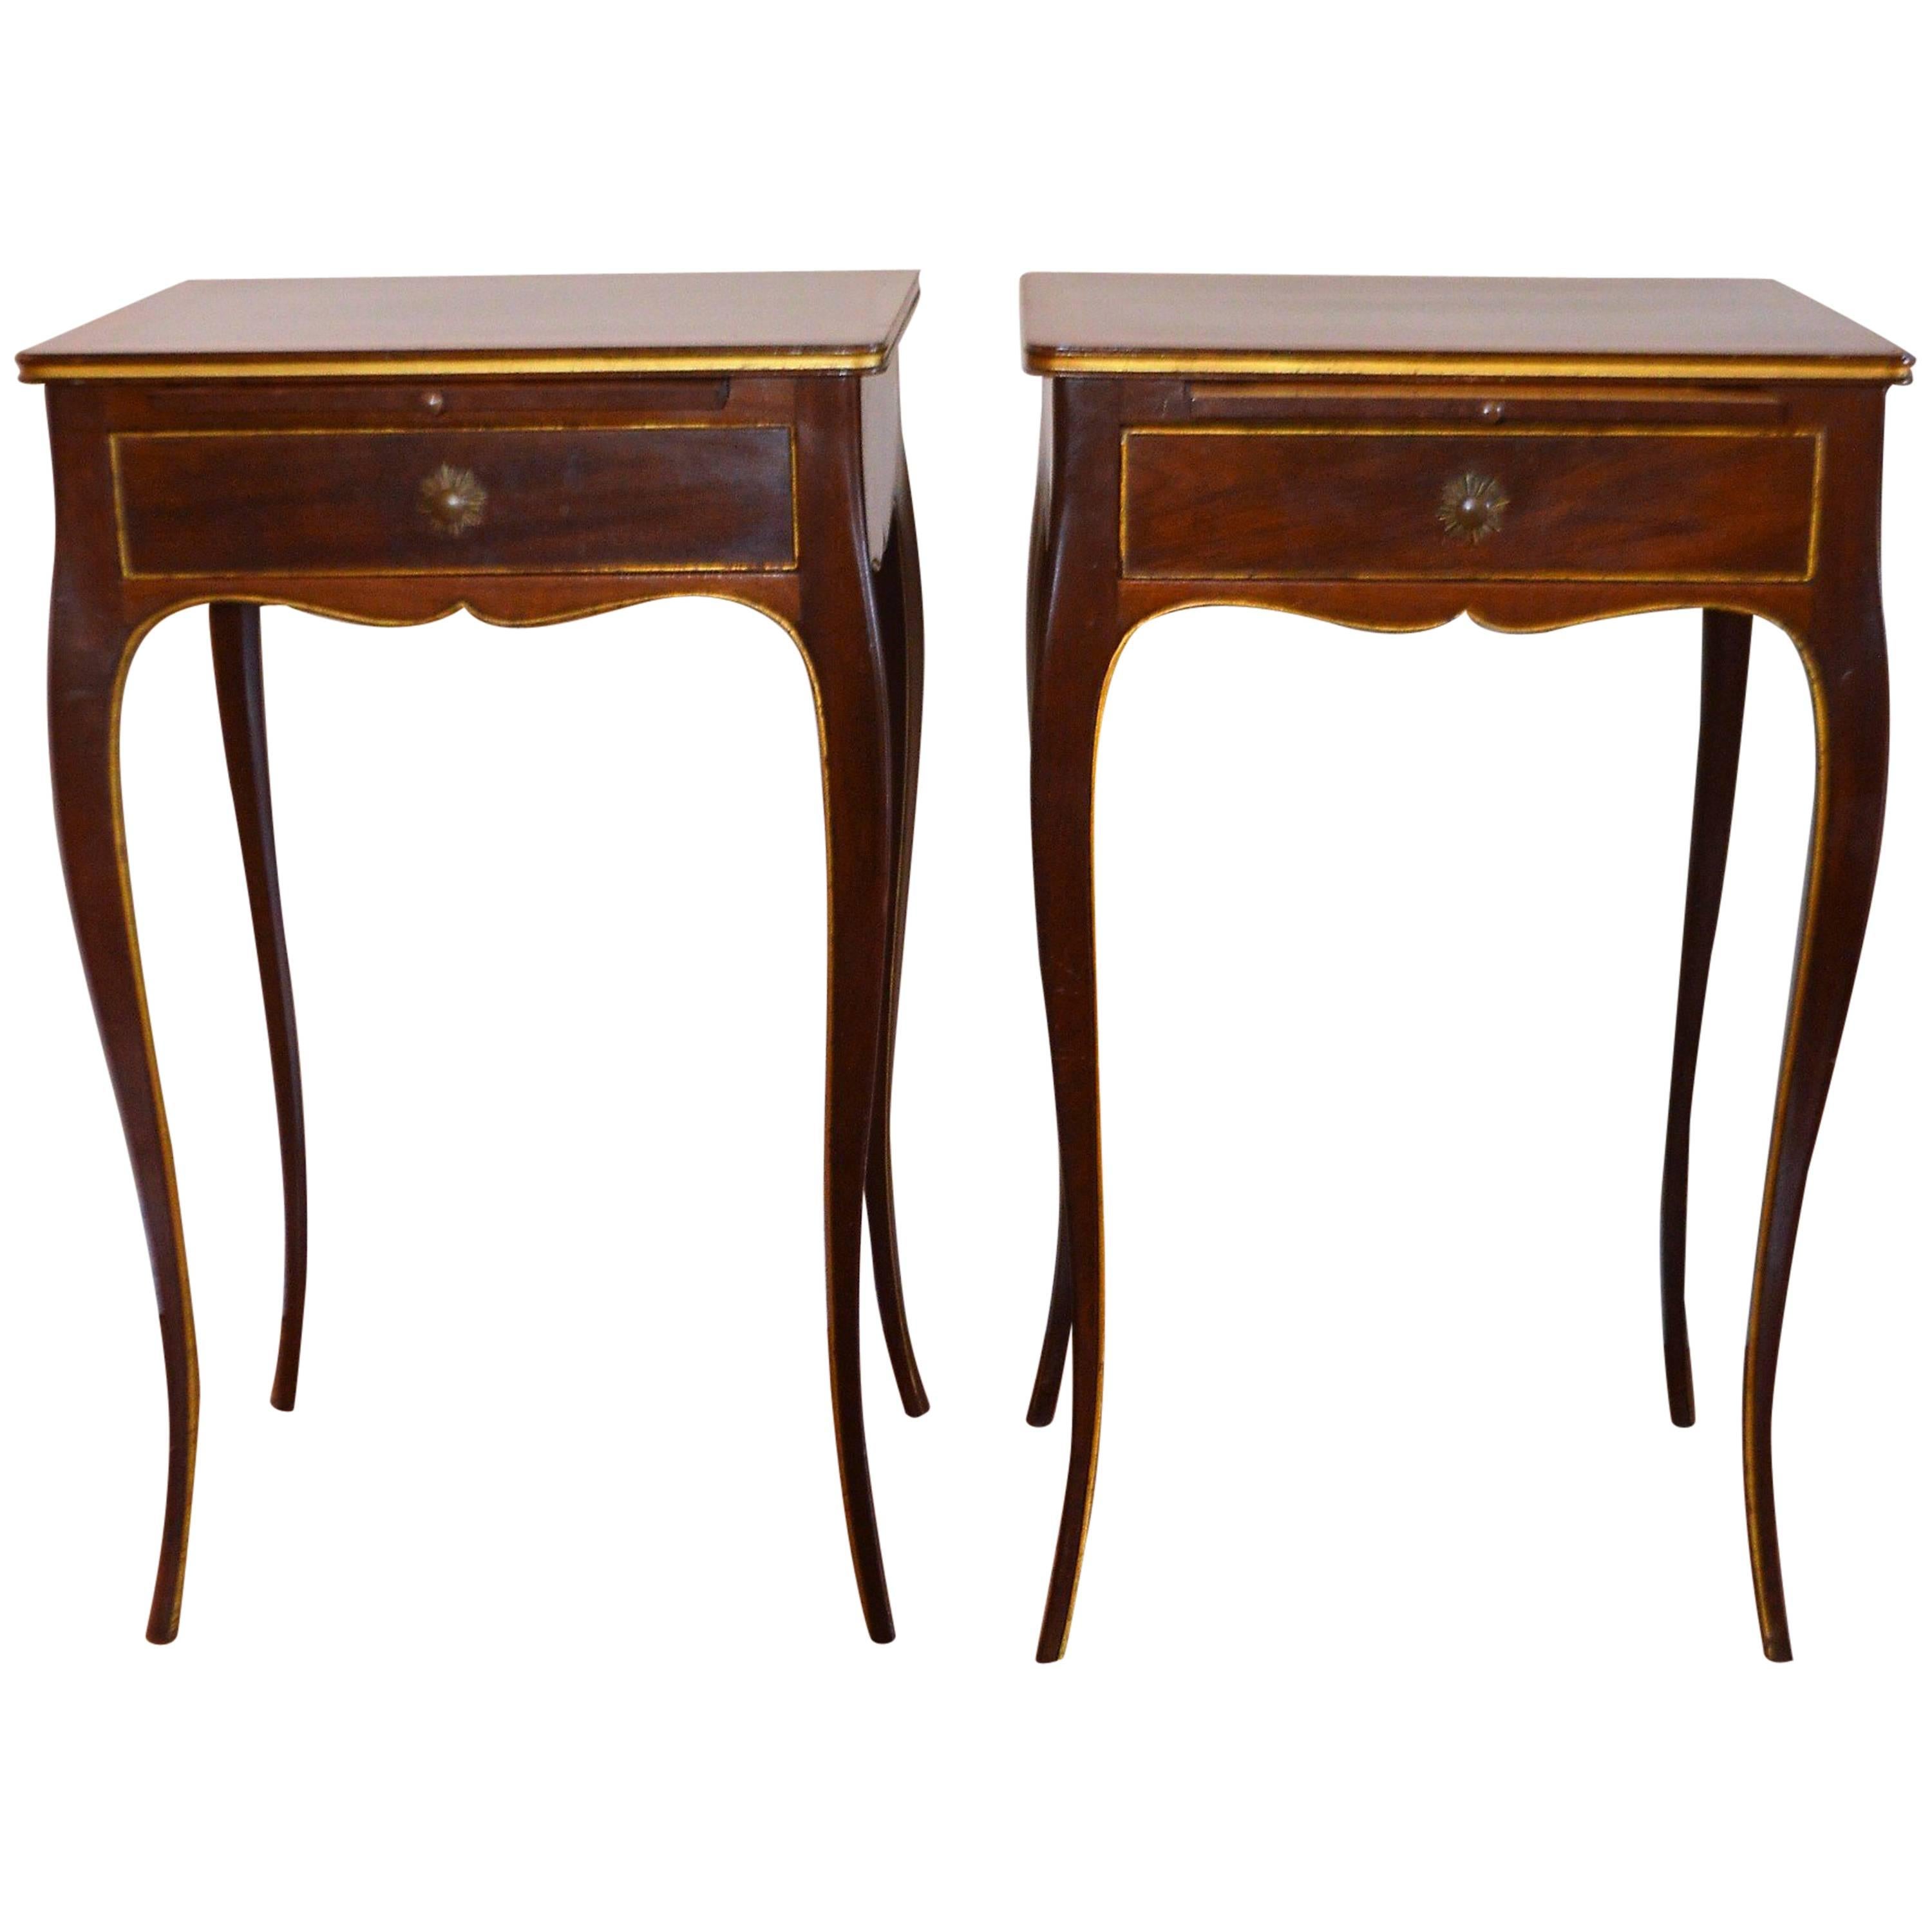 Pair of Elegant Mahogany Side Tables, Gilded Molding, Drawer and Pull-Out Table